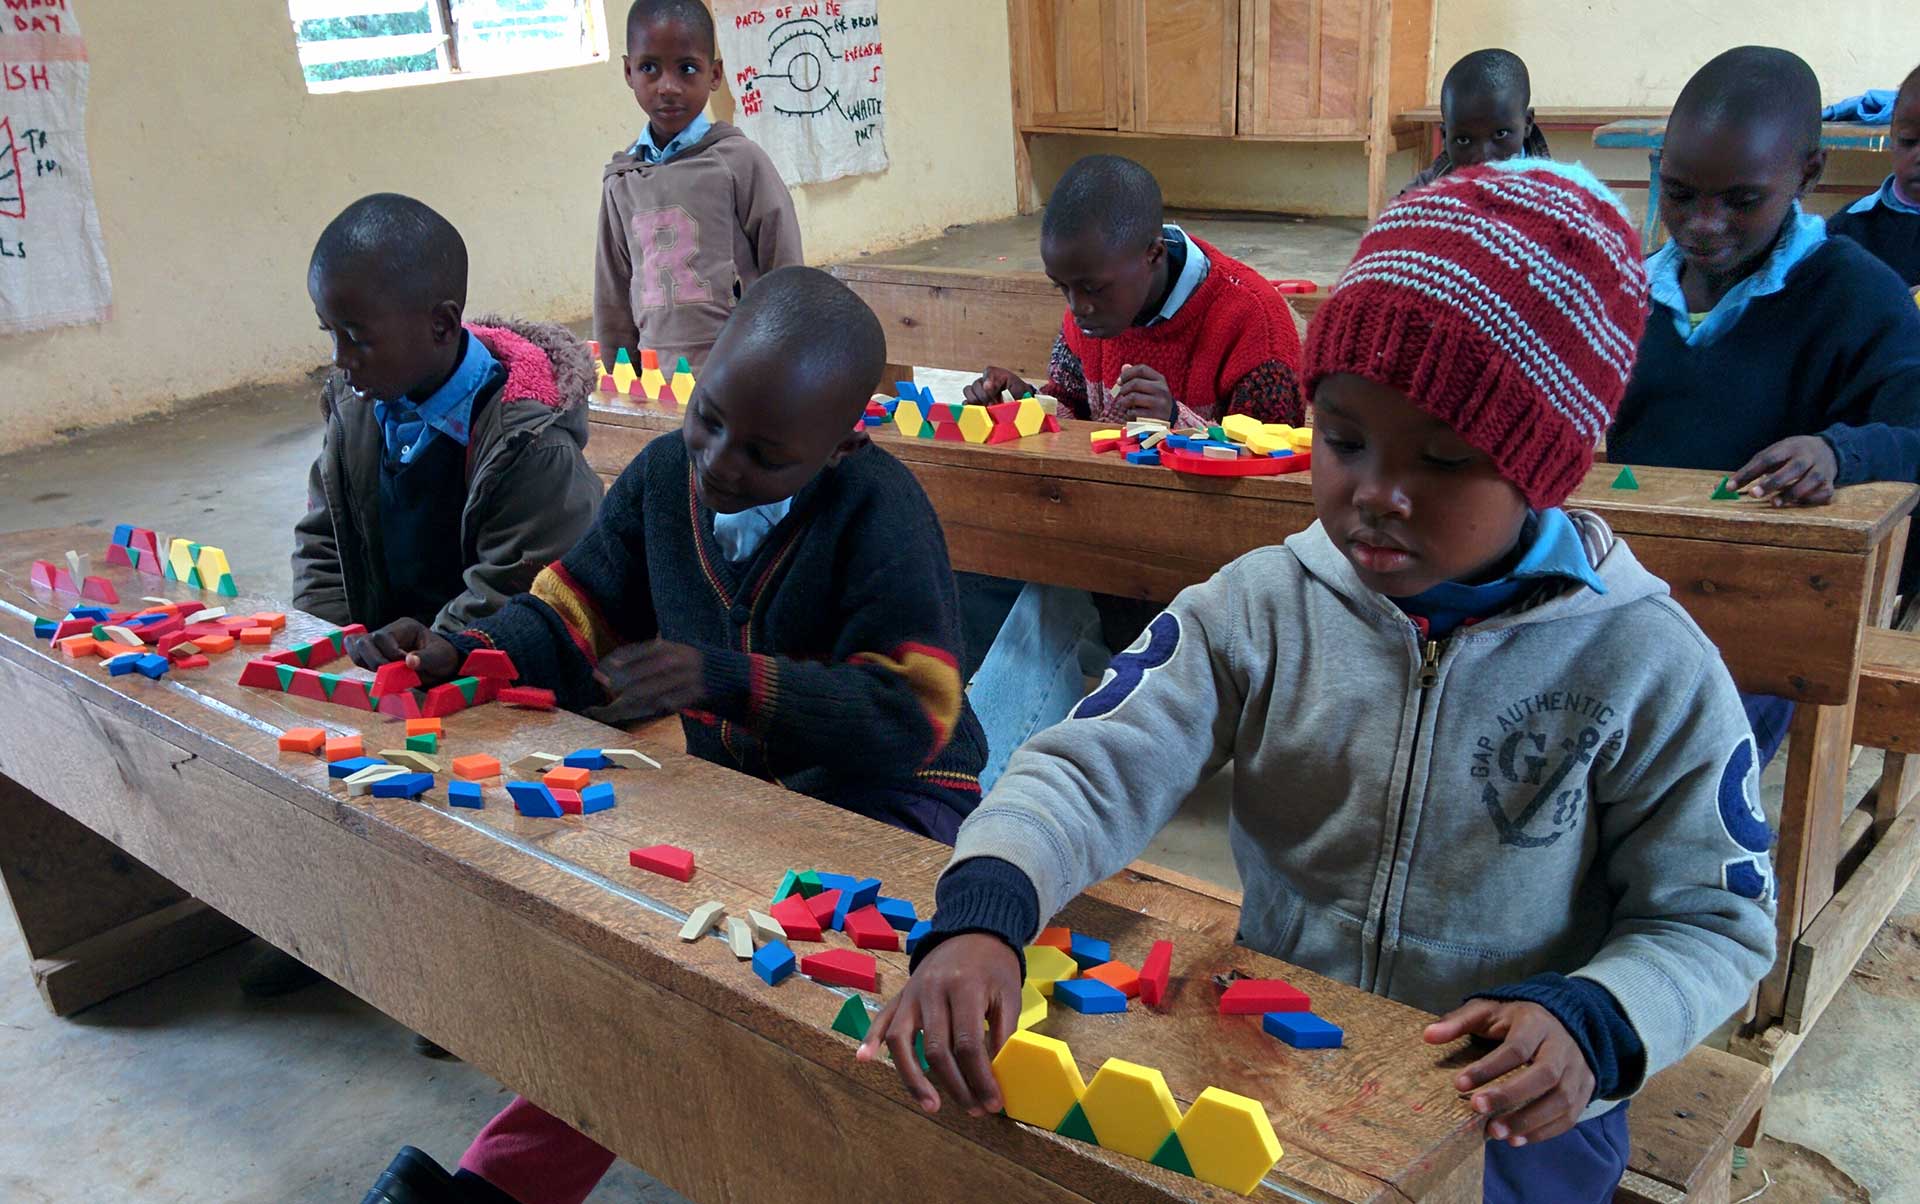 OLOG Students in a classroom using learning aids